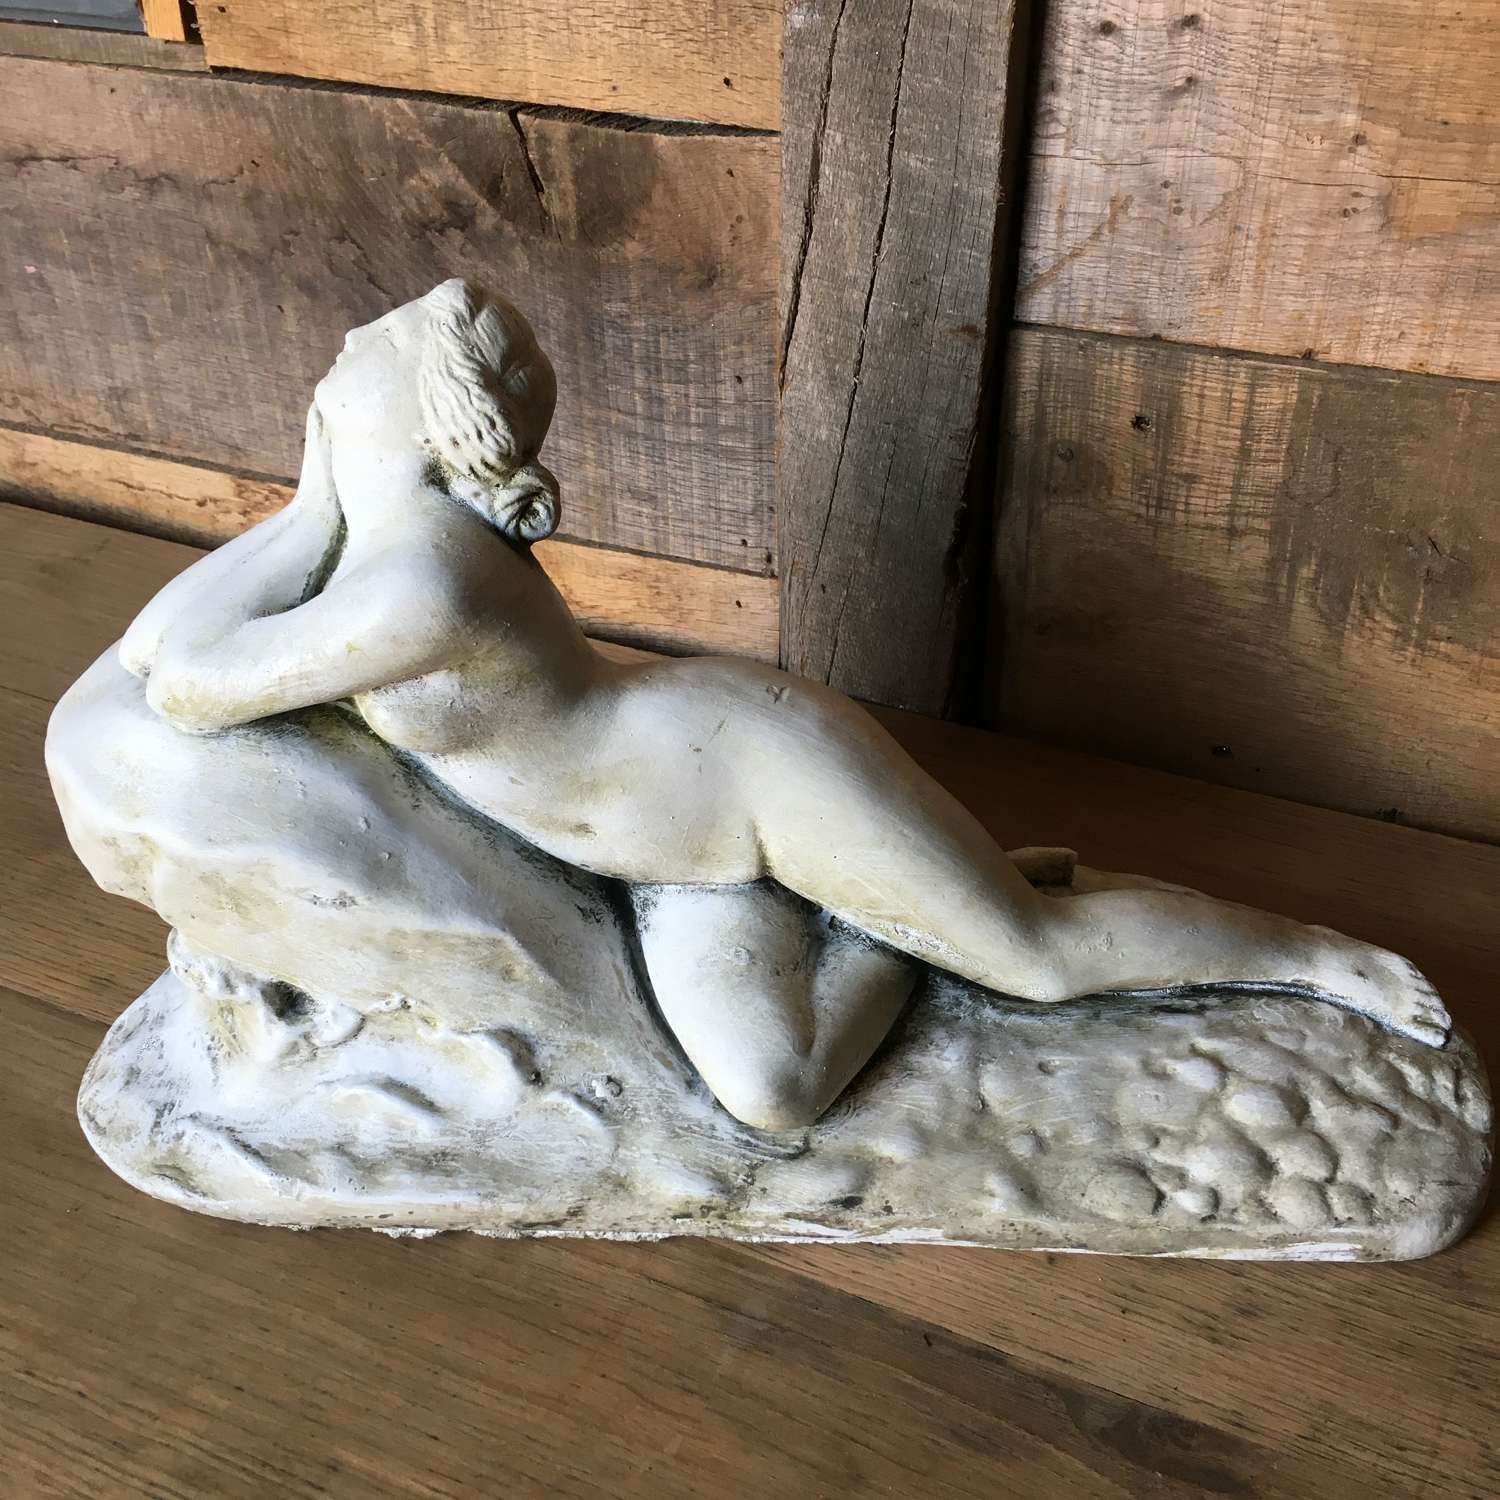 Stone statue of a naked woman